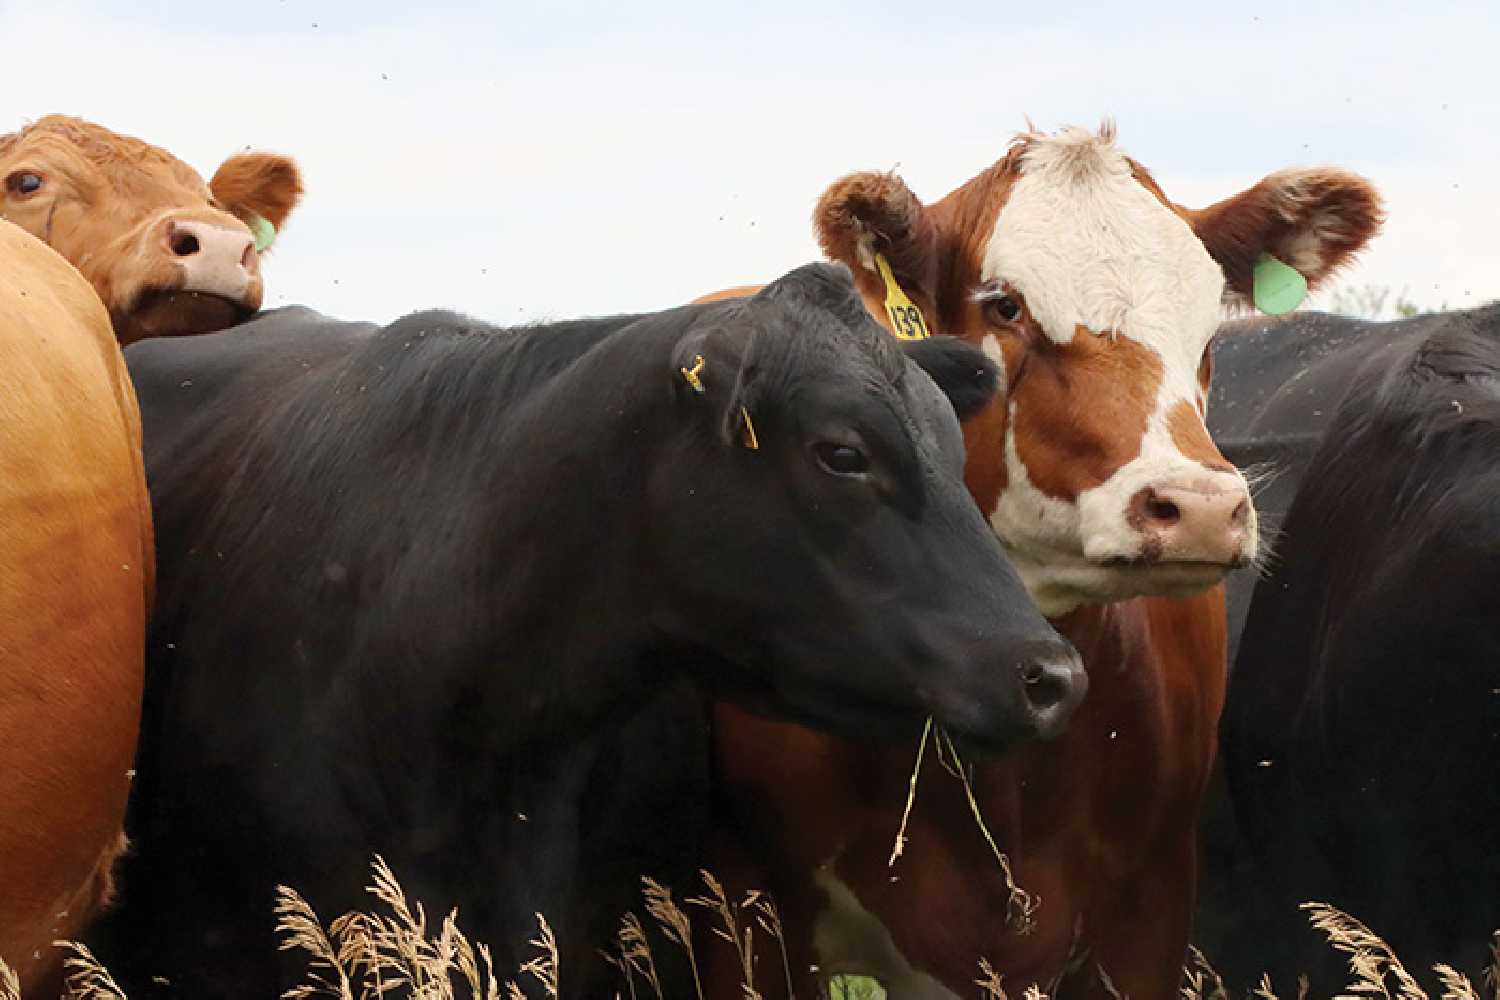 Livestock producers and livestock organizations have expressed concern about federal labelling that targets ground beef and pork as unhealthy.